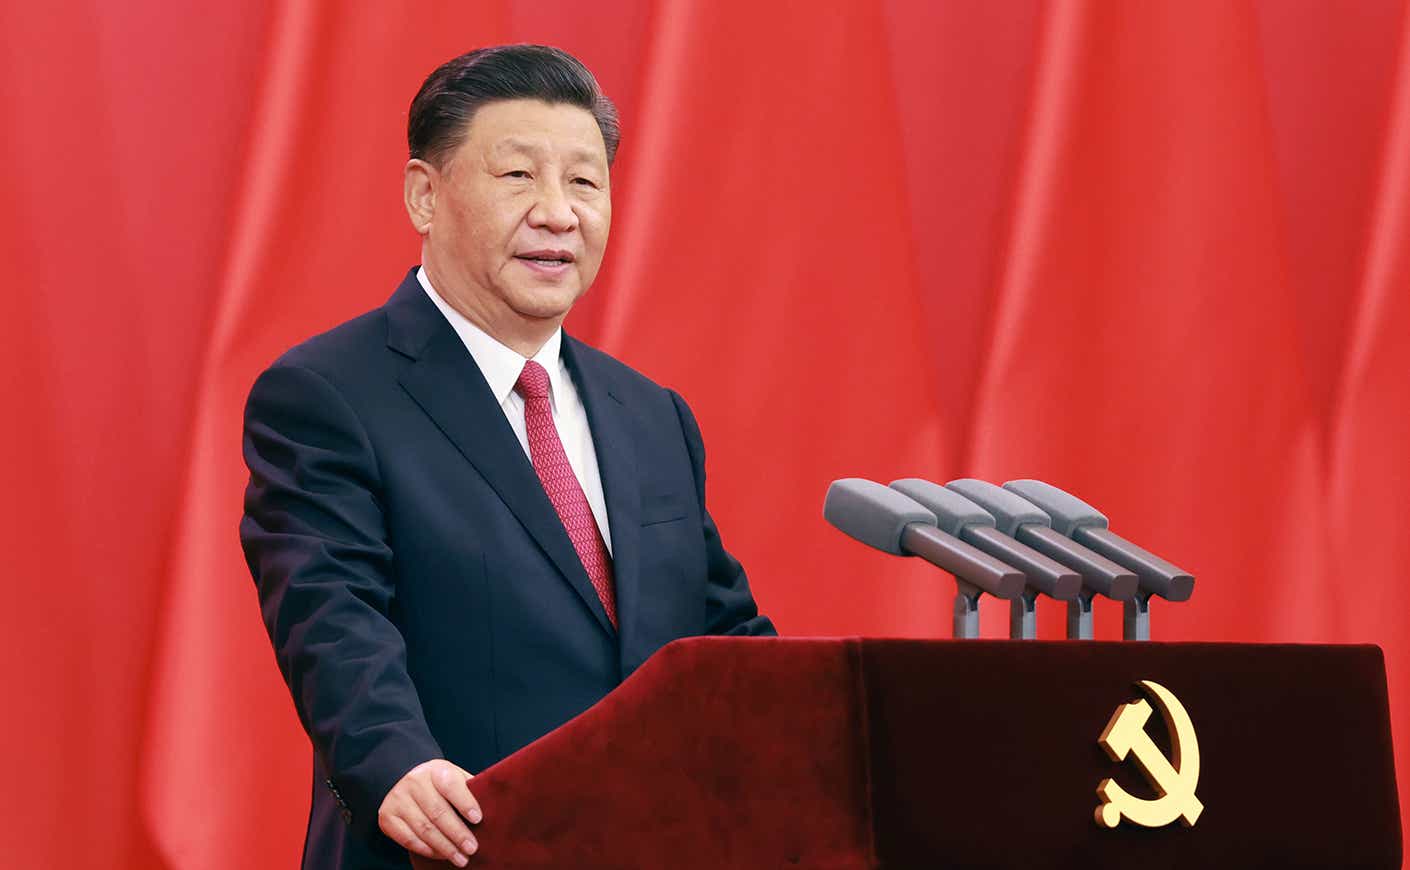 Xi Jinping at podium in front of red curtain